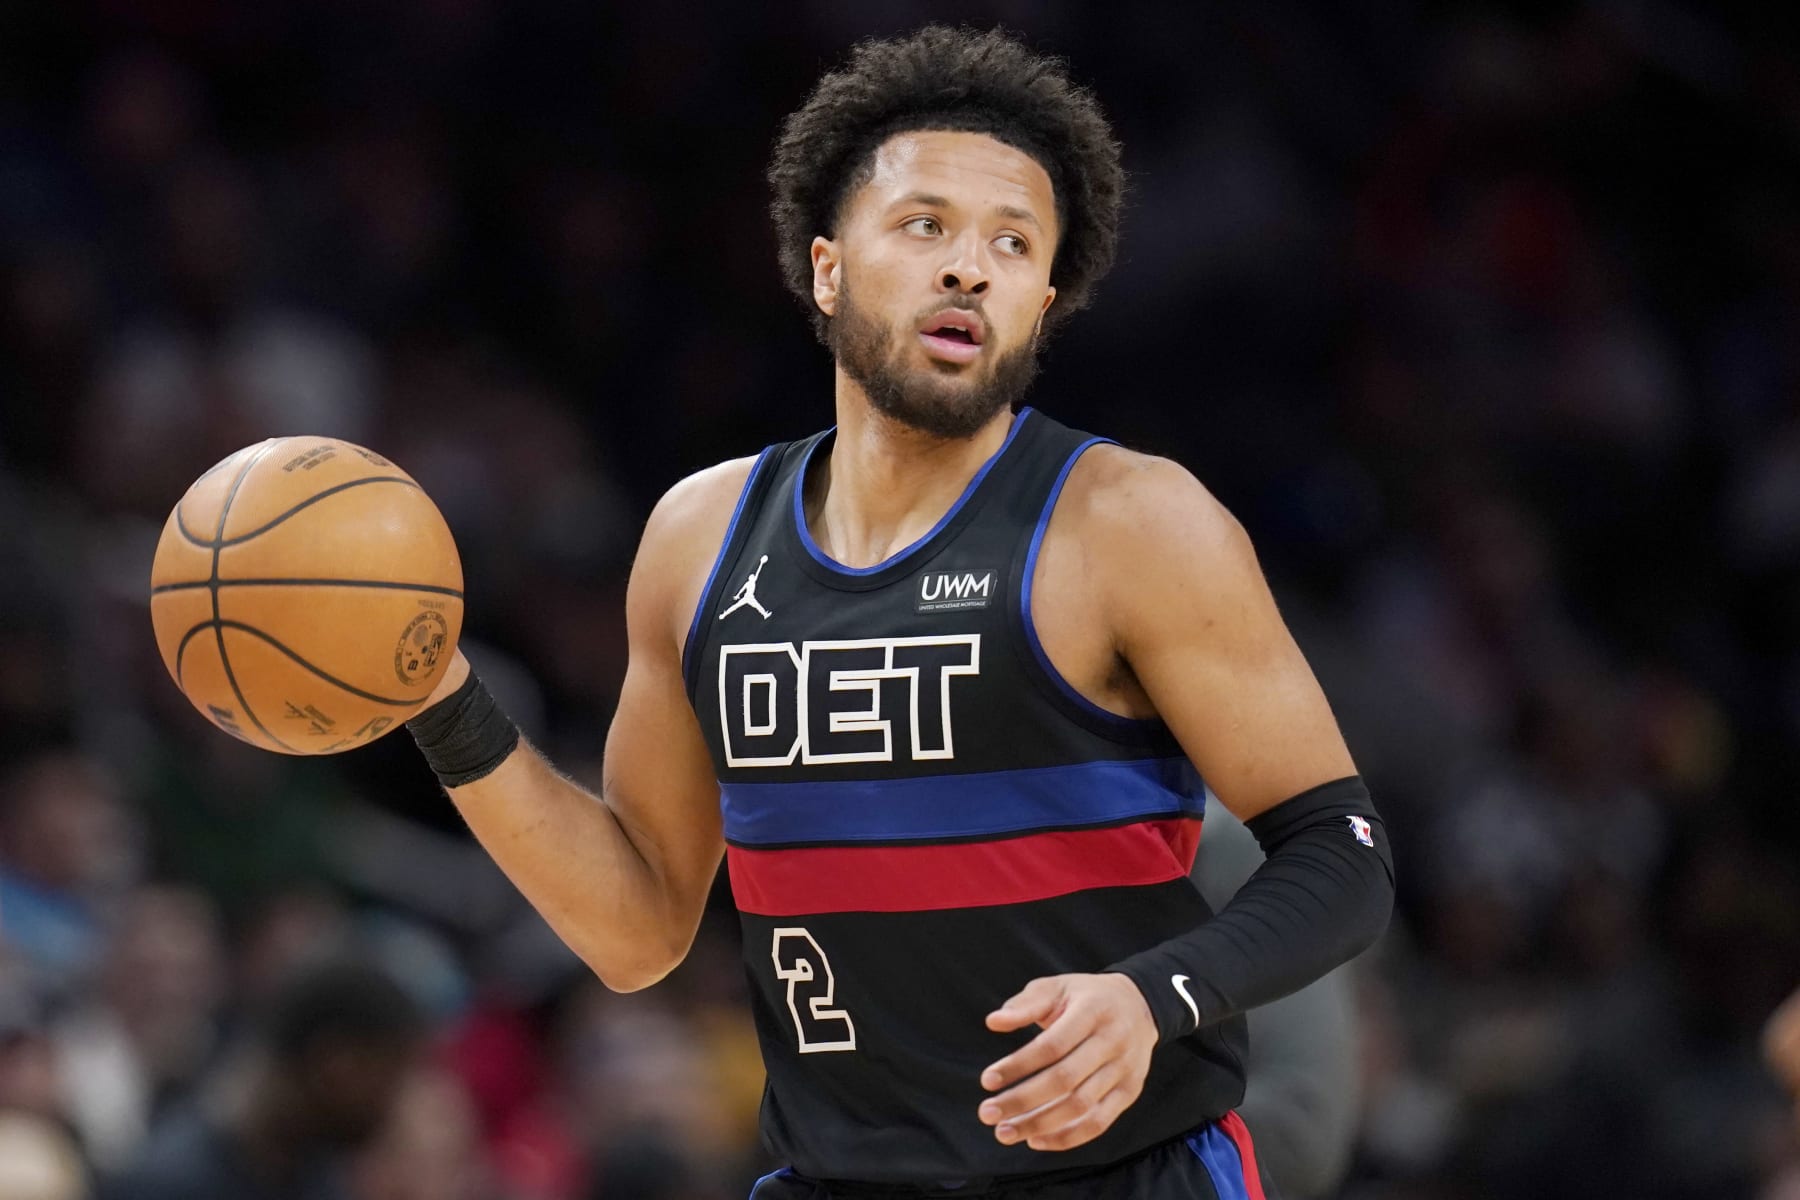 Cade Cunningham and the Pistons extend their contract by 5 years and 4 million; maximum value 9 million